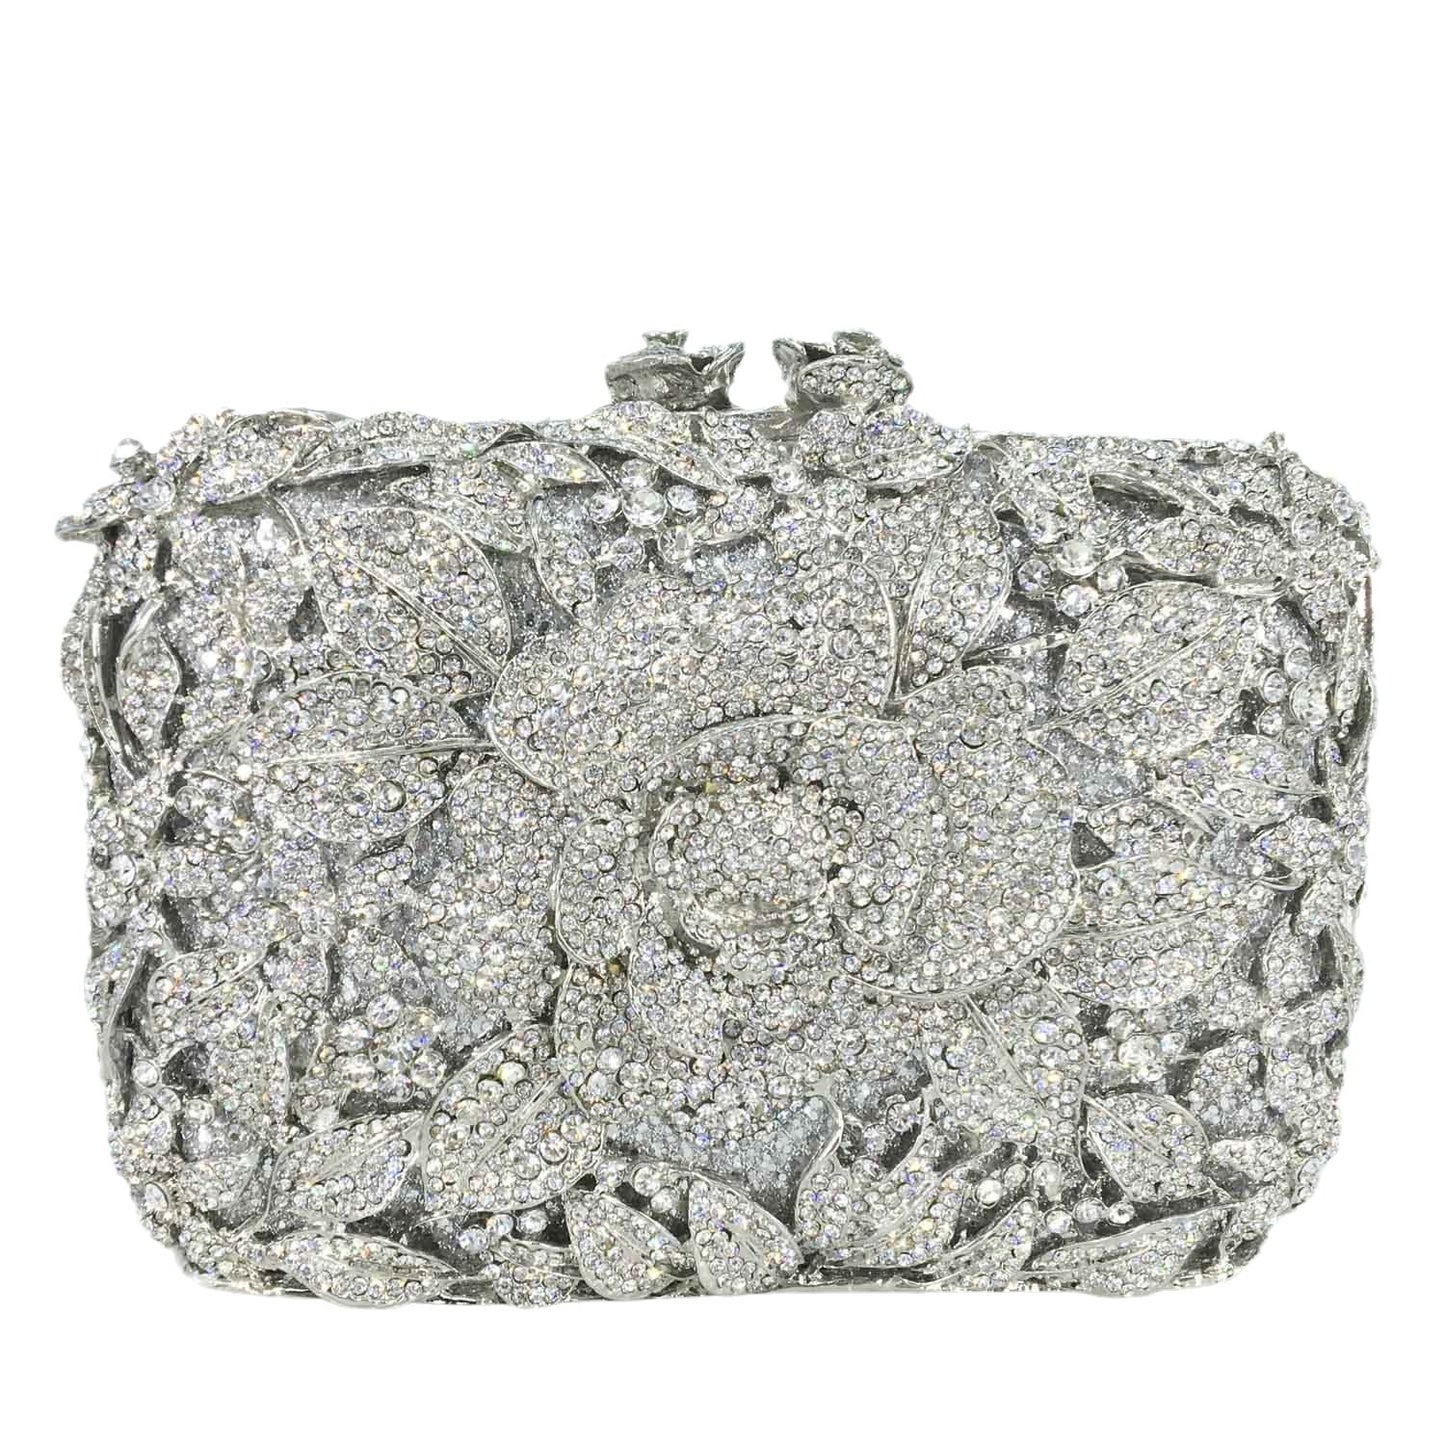 Multicolored Flowers Butterfly Crystal Clutch Evening Bag Wedding Purse 6 / Small Size